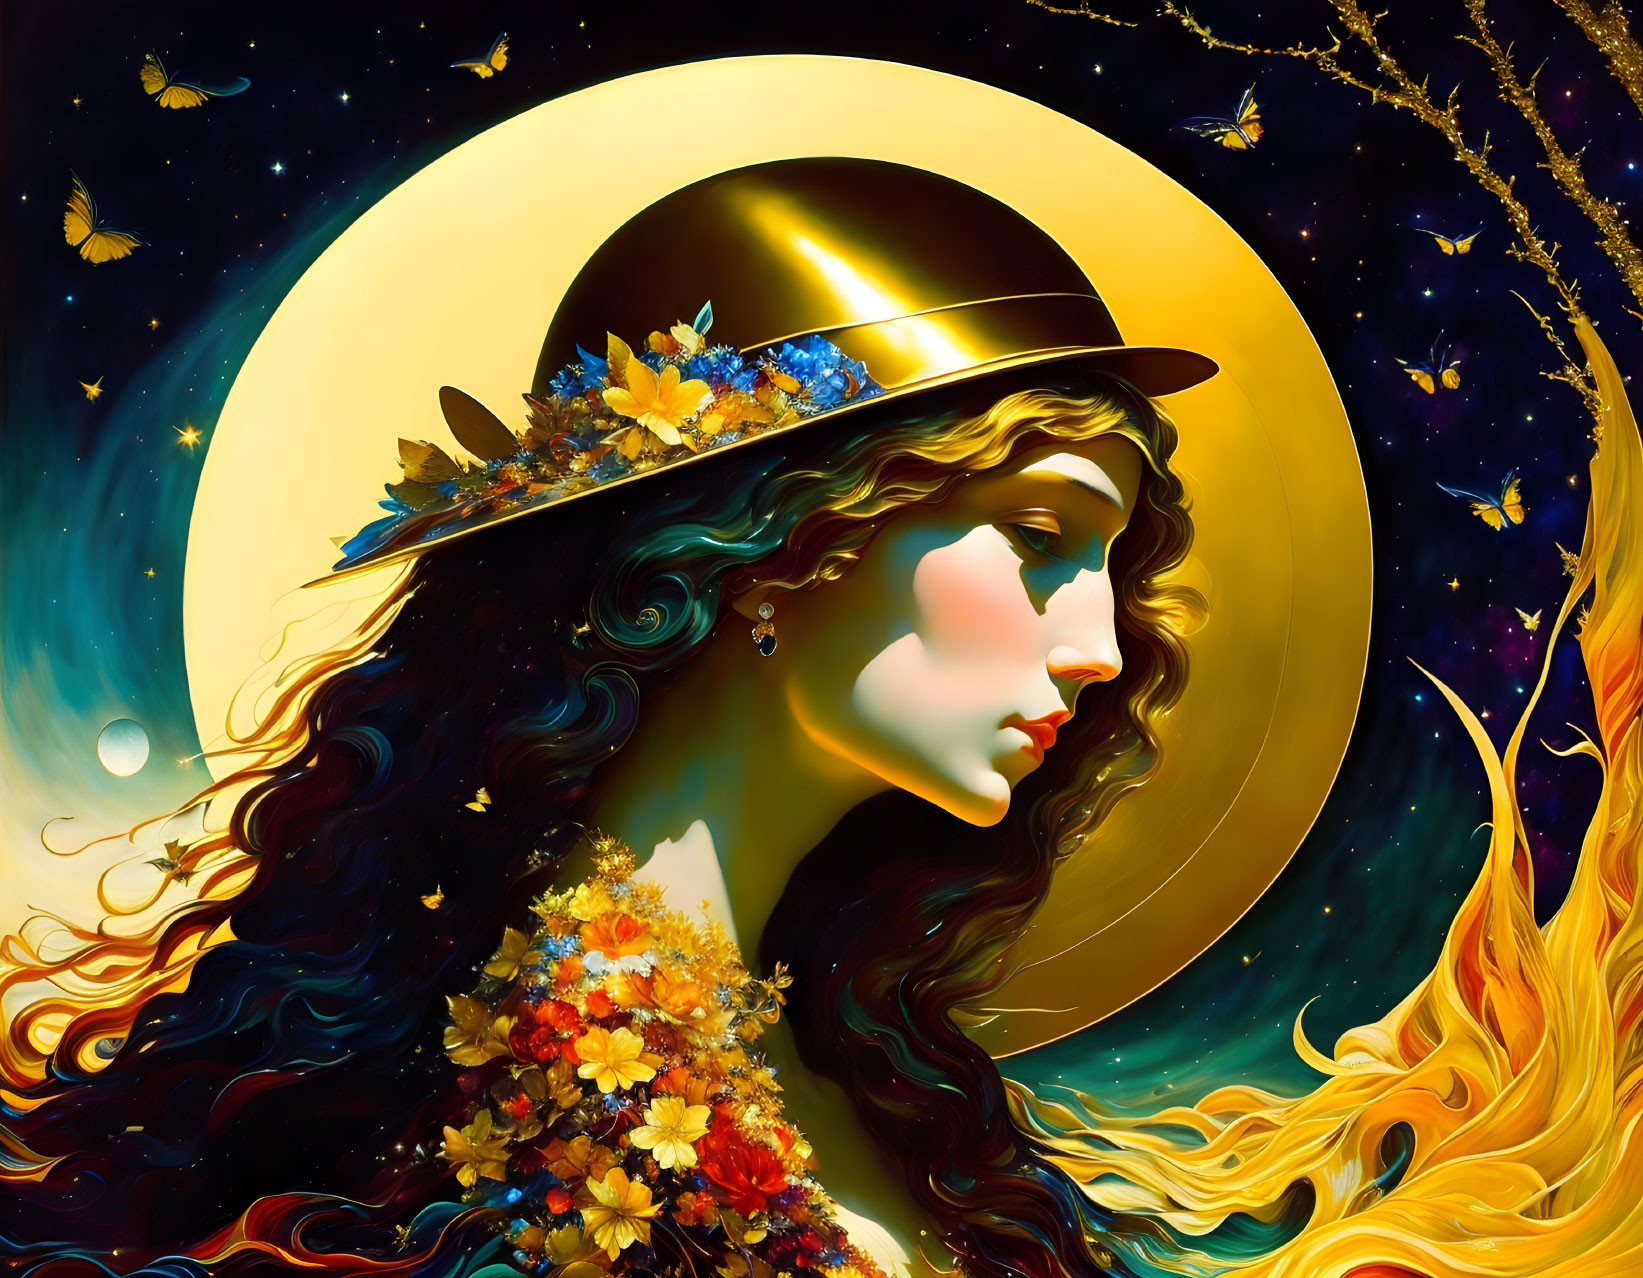 Stylized portrait of woman with flowing hair and floral hat against cosmic backdrop